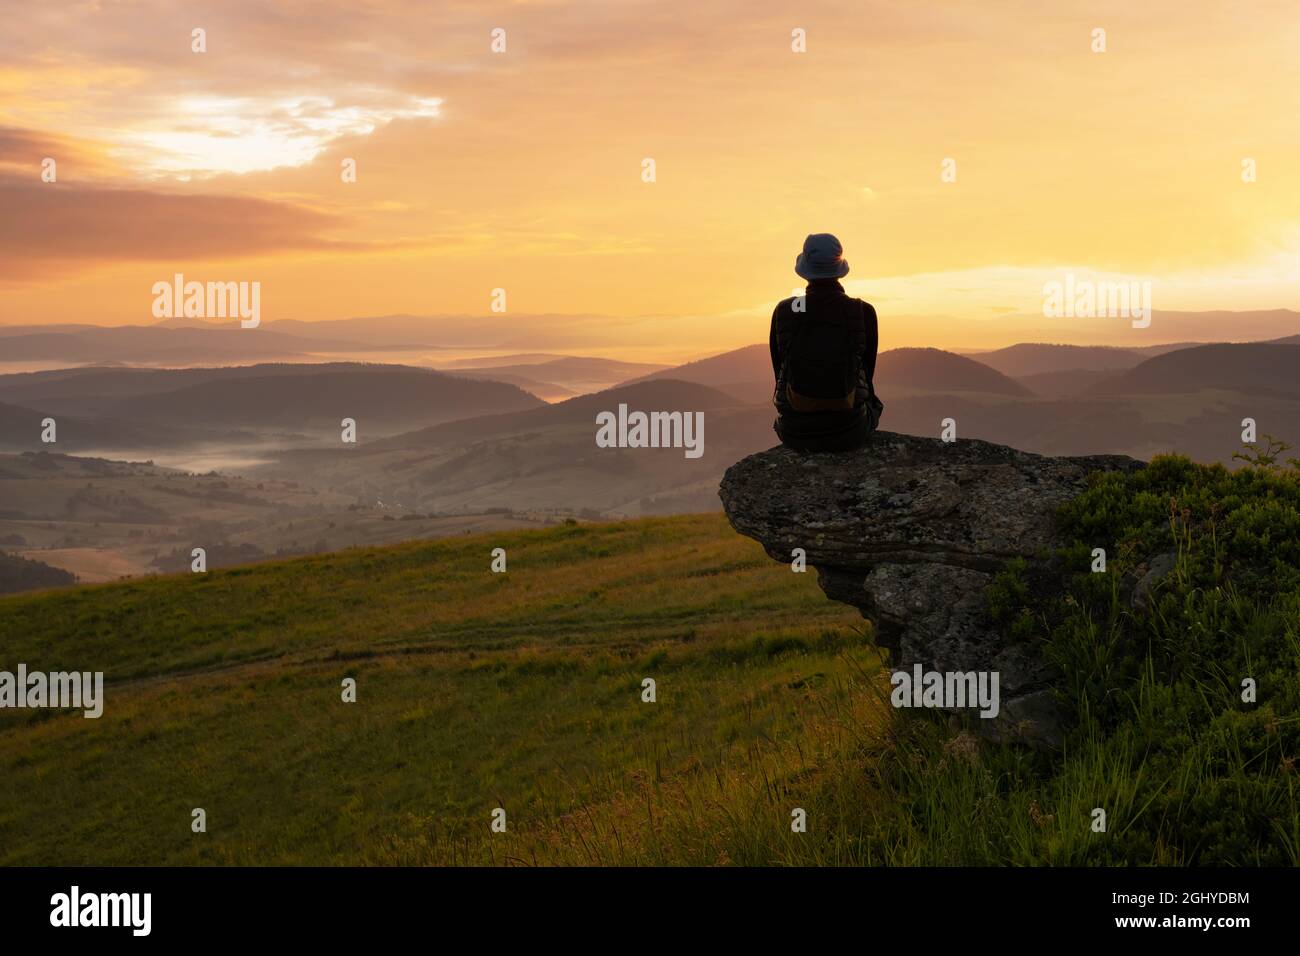 Alone tourist on the edge of the mountain hill against the backdrop of an incredible sunset mountains landscape Stock Photo